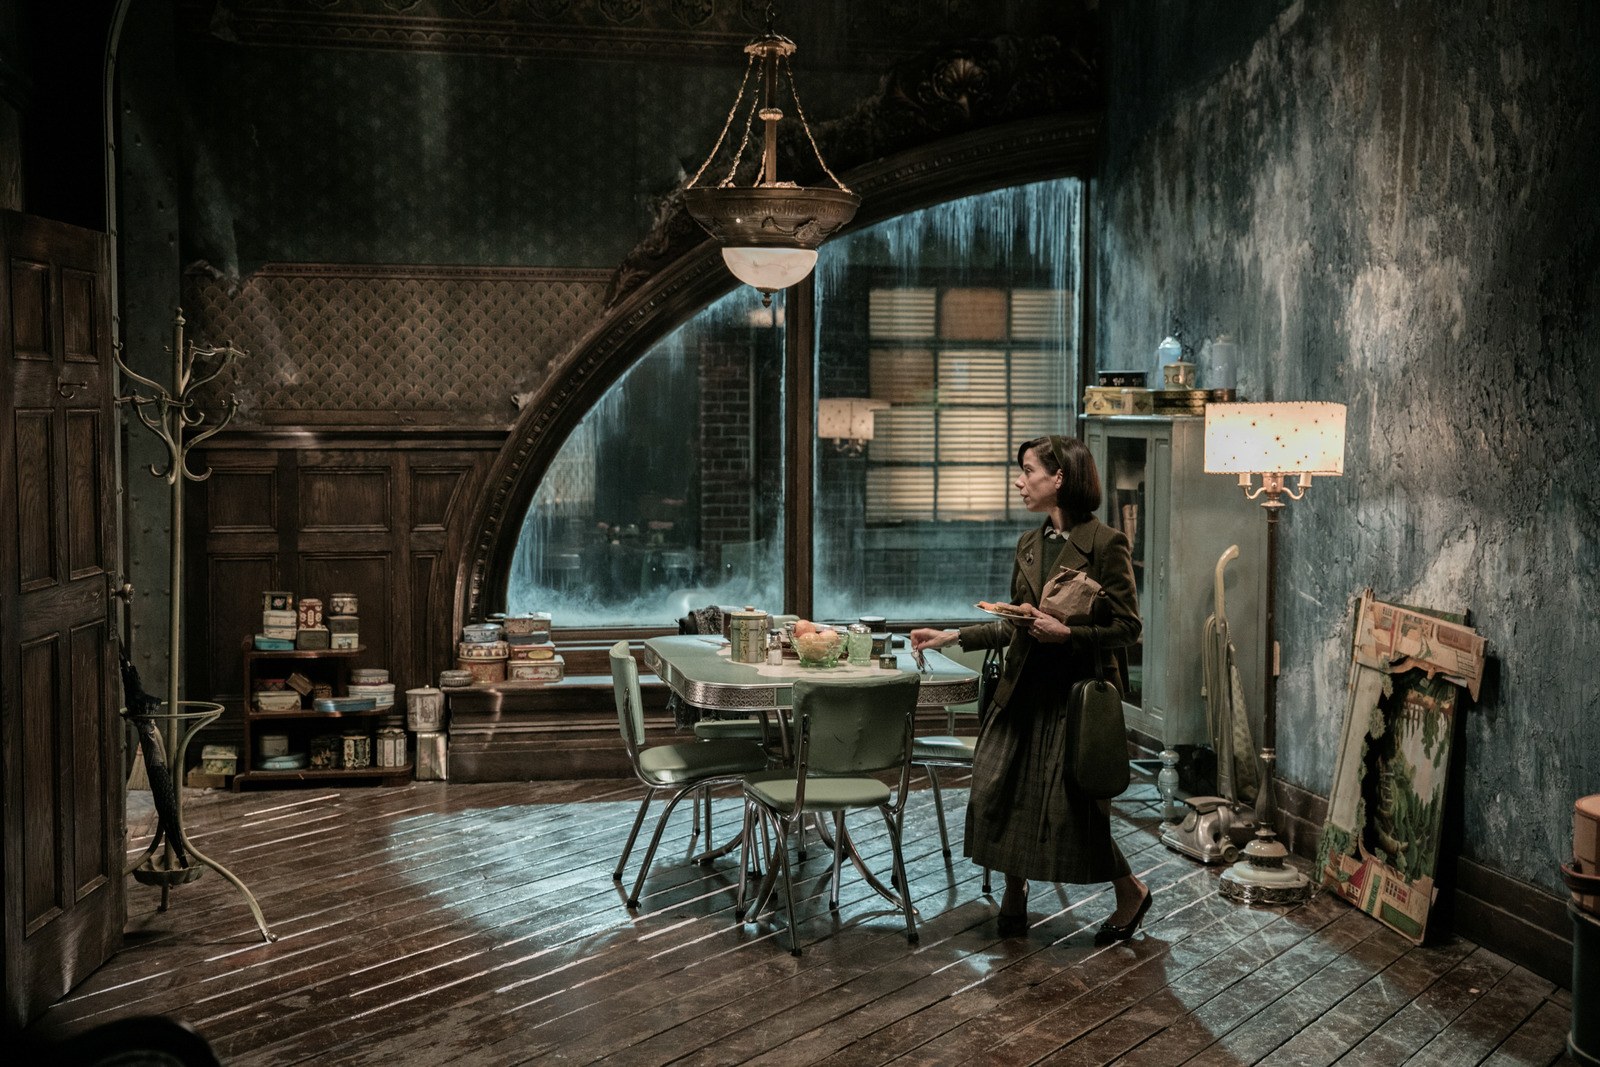 Vintage, handmade wallpaper, and rich fabrics are stand-out elements in the film.